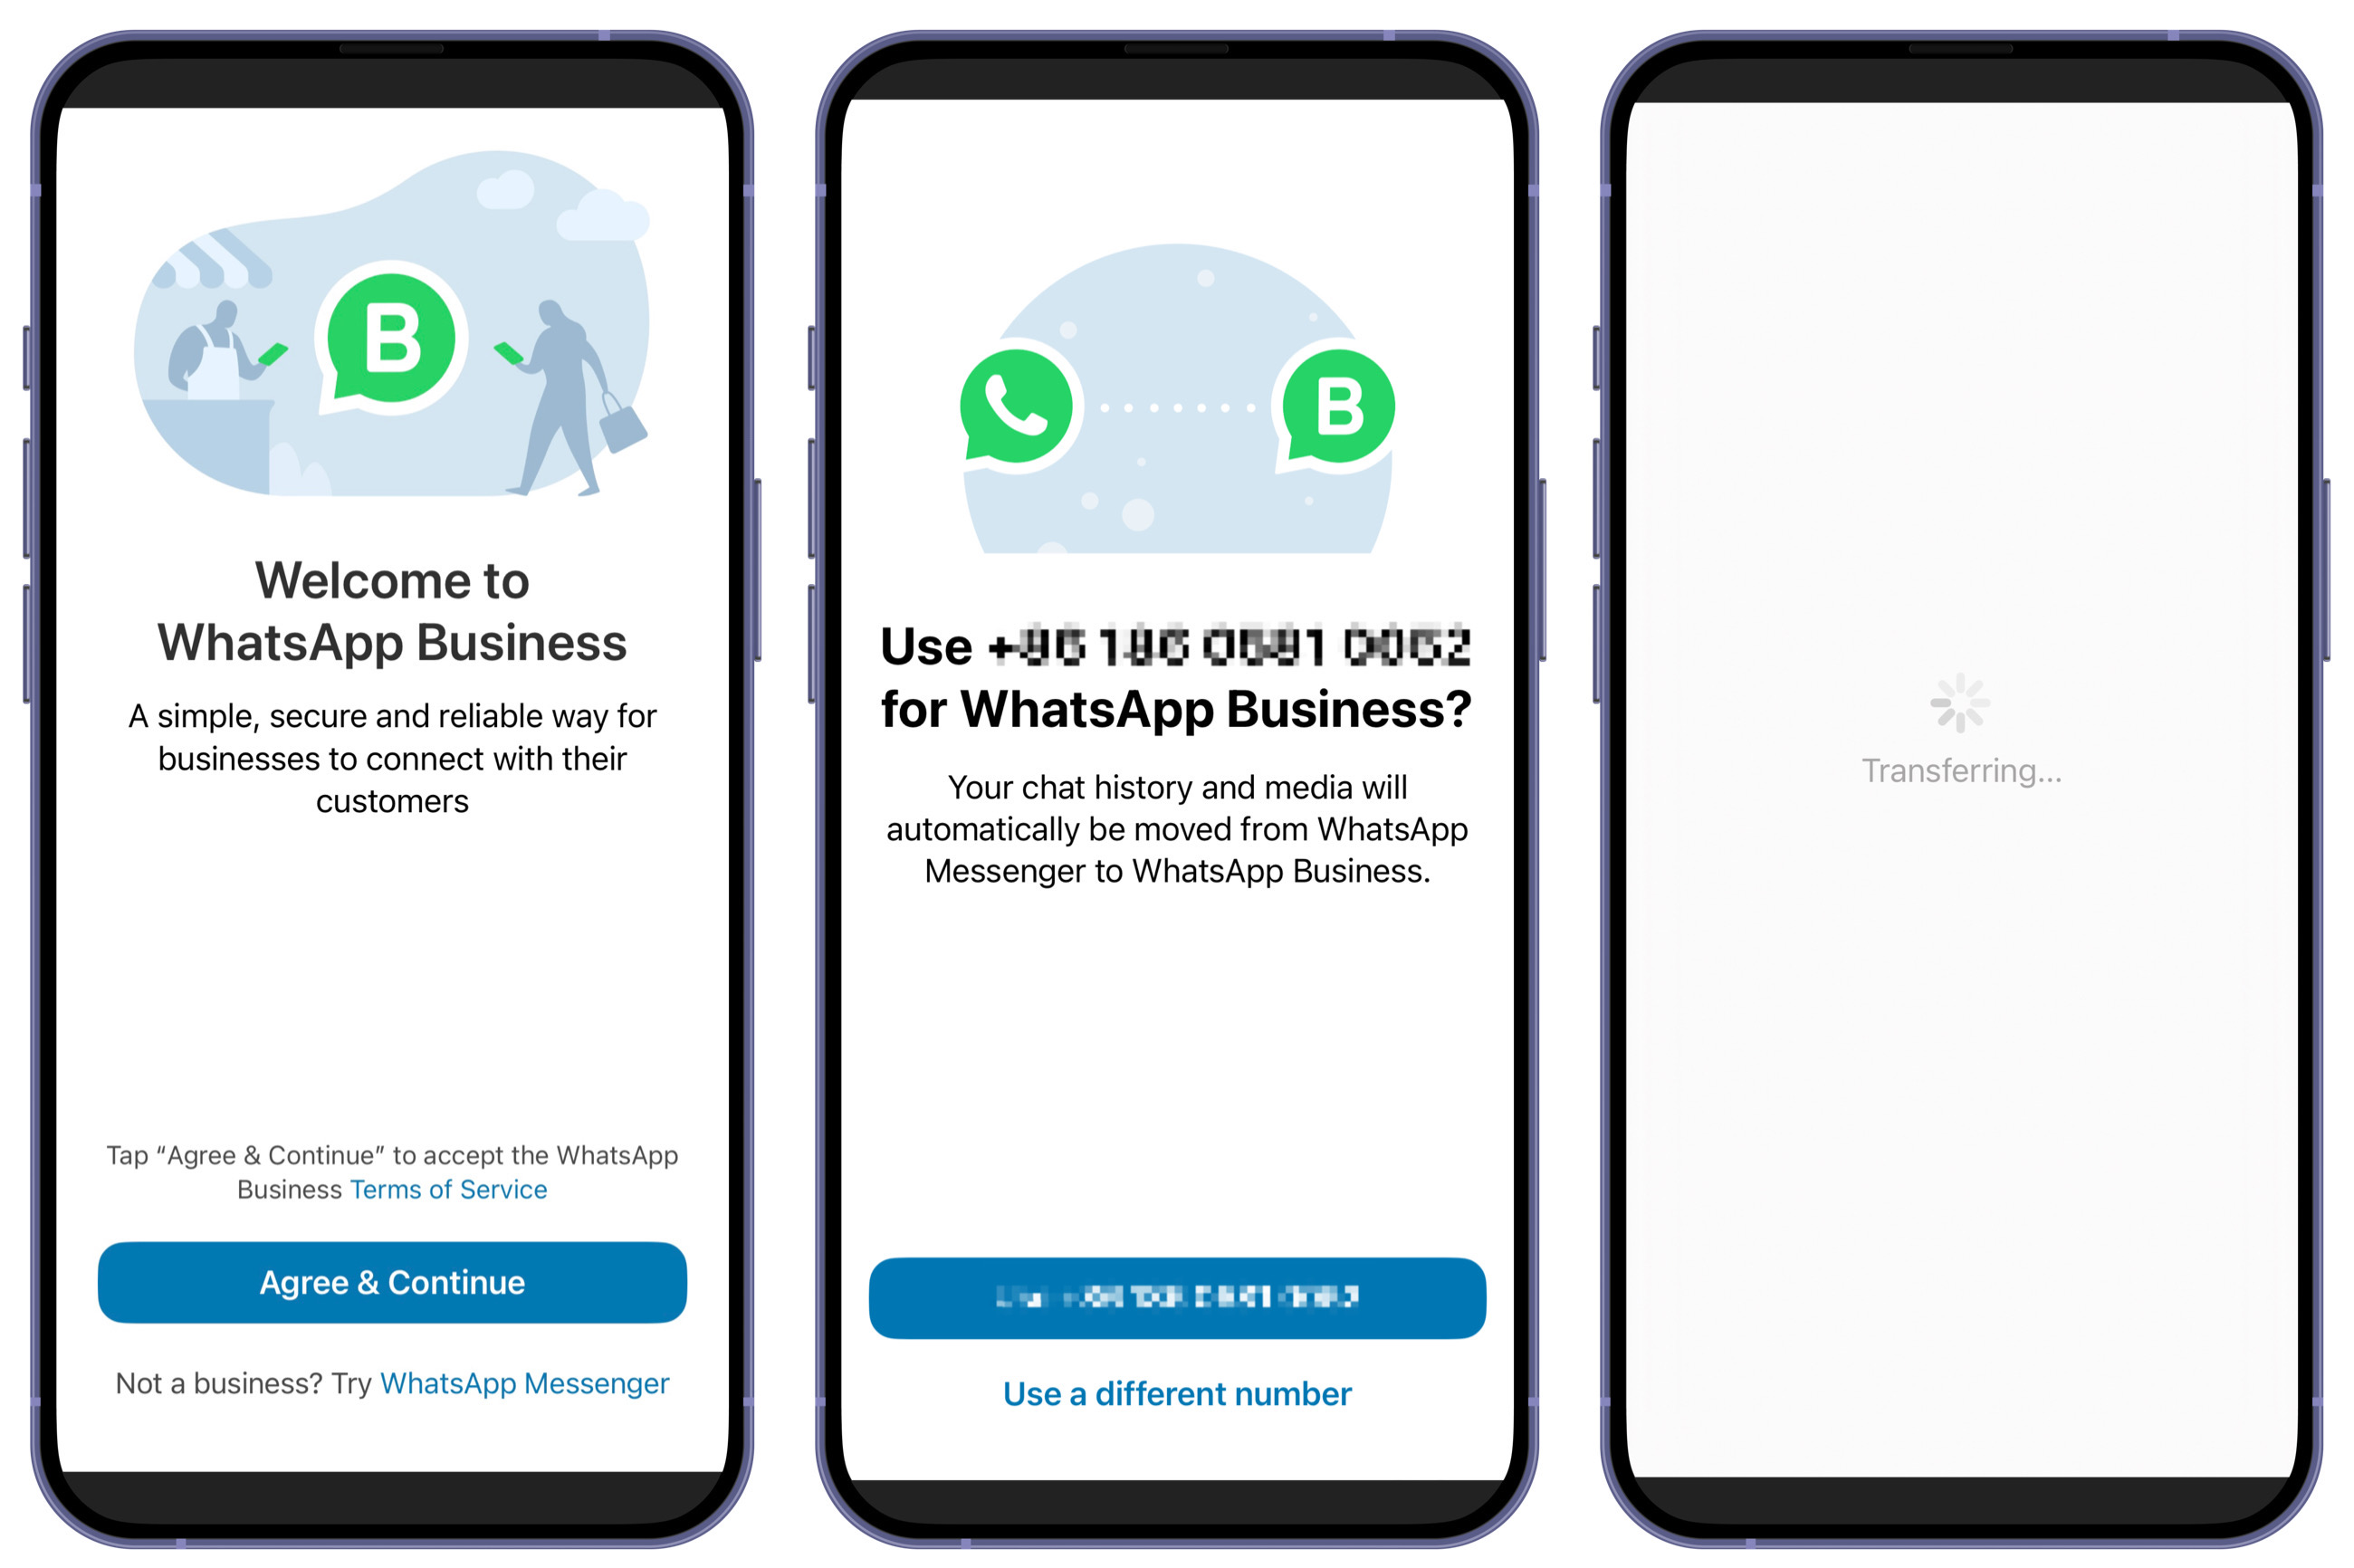 Steps to Change WhatsApp to Business Account: Register & Transfer Your Account